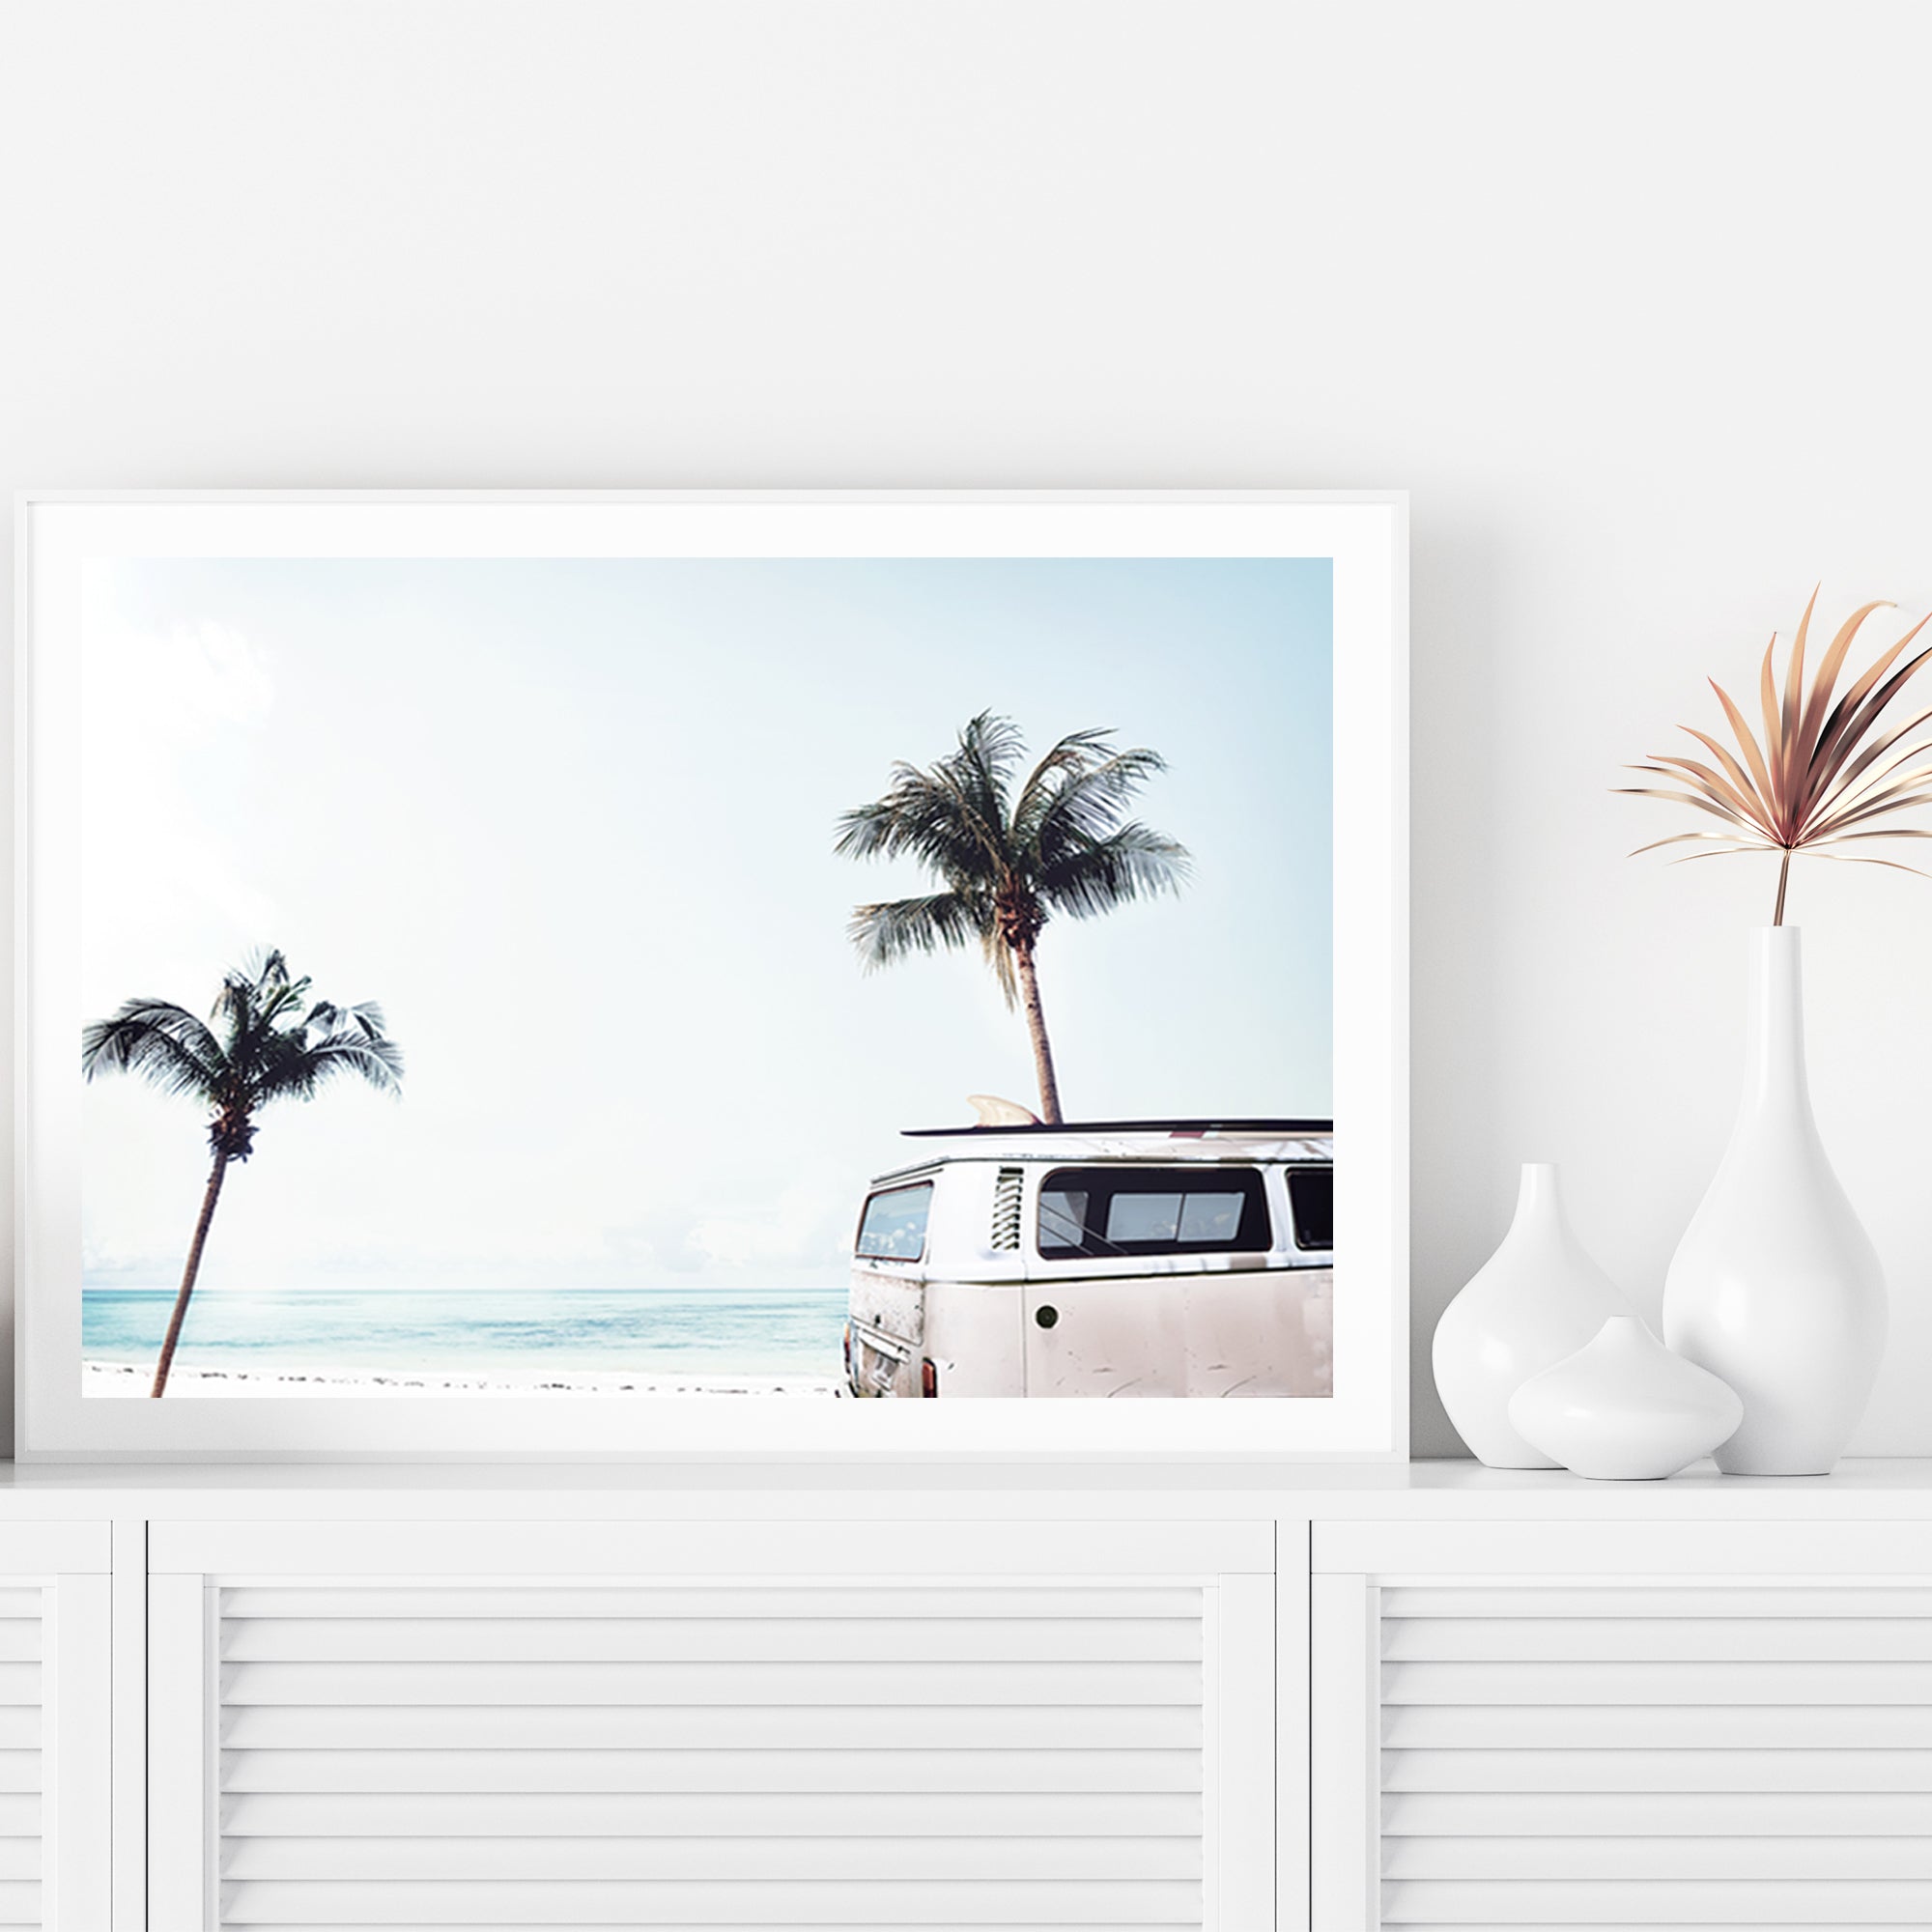 An artwork featuring an iconic blue Kombi van at the beach with palm trees, available in framed or unframed prints.